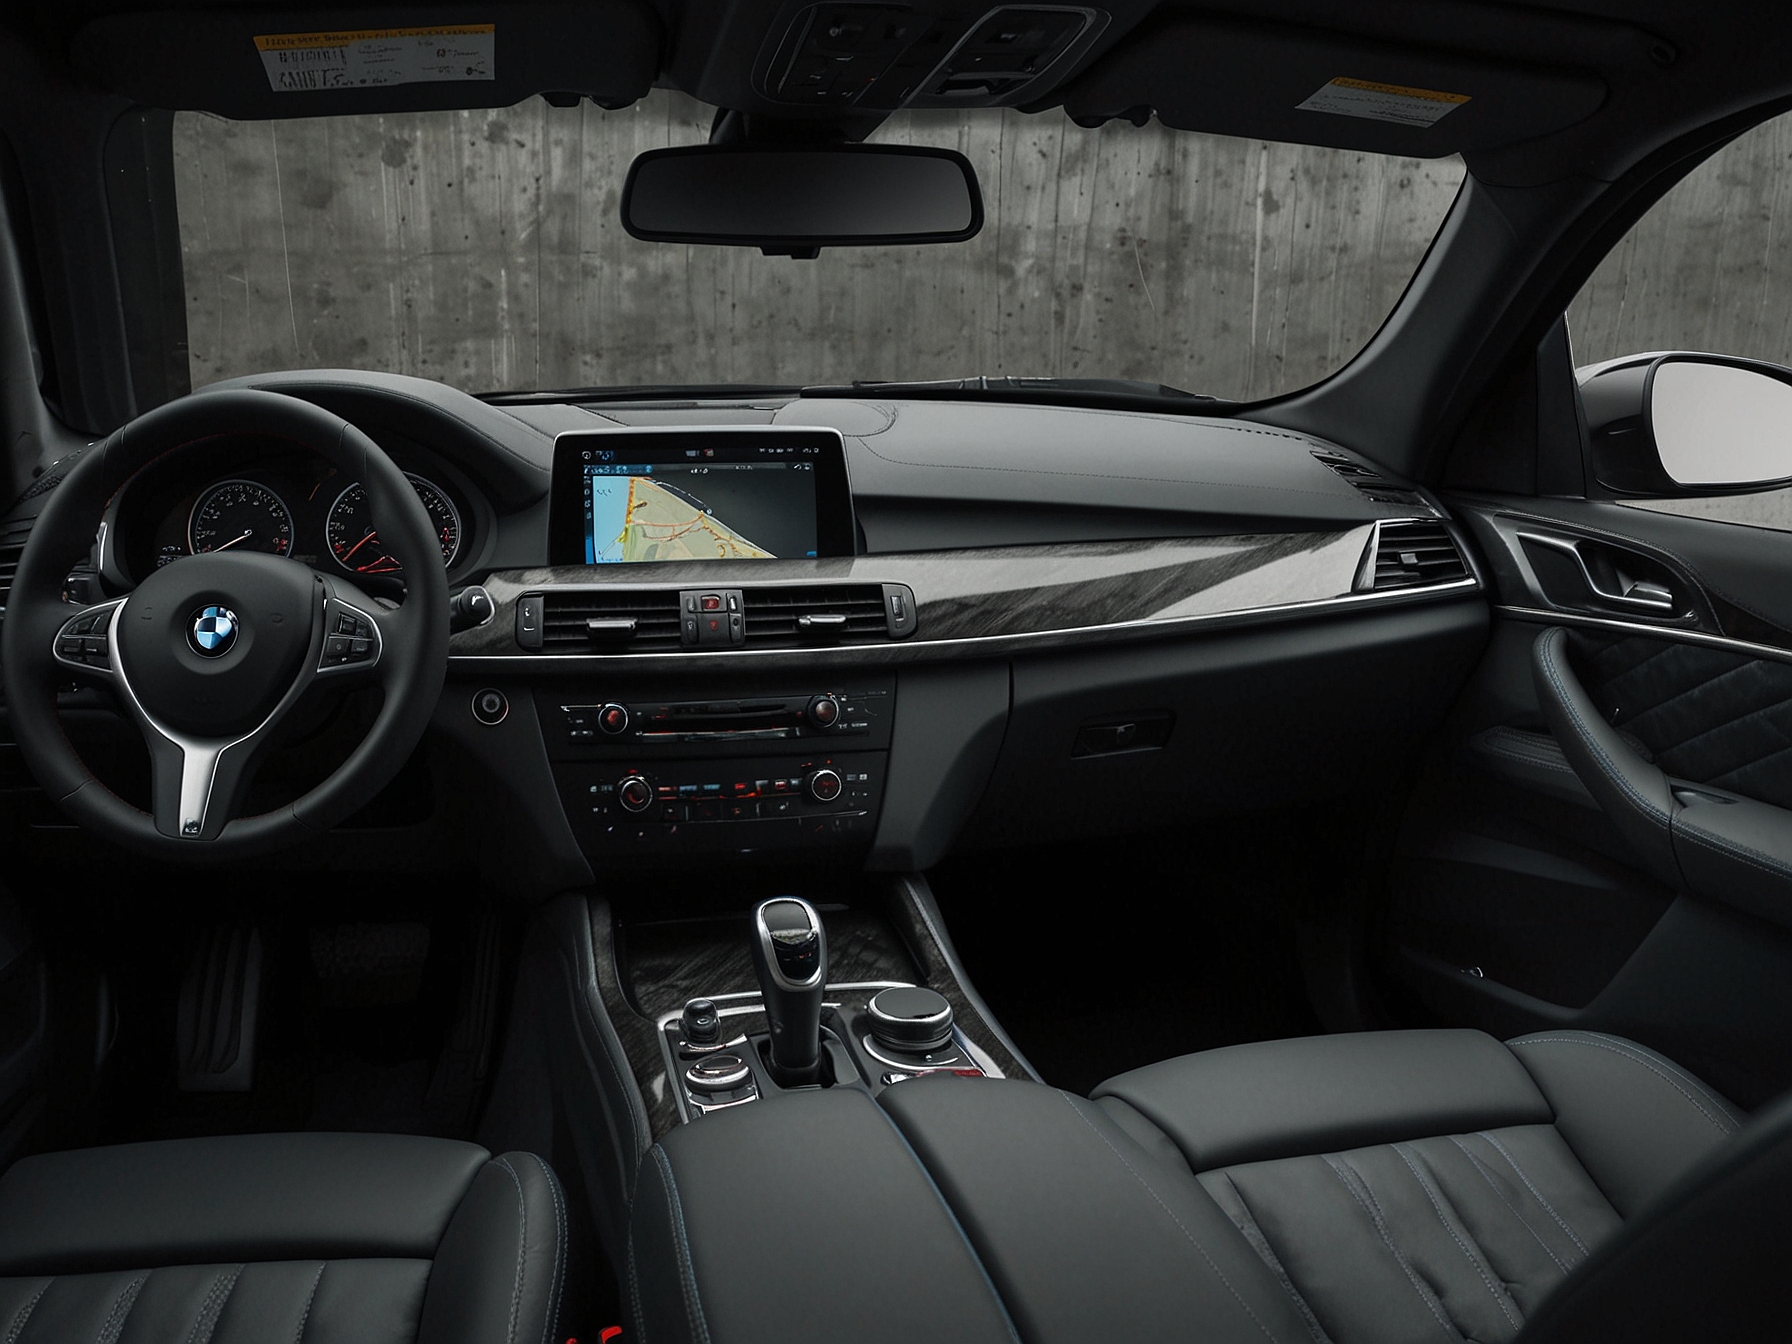 Interior view of the BMW X5 Silver Anniversary Edition featuring Carbon Fiber trim, advanced BMW Curved Display with Operating System 8.5, and a commemorative plaque on the compartment door.